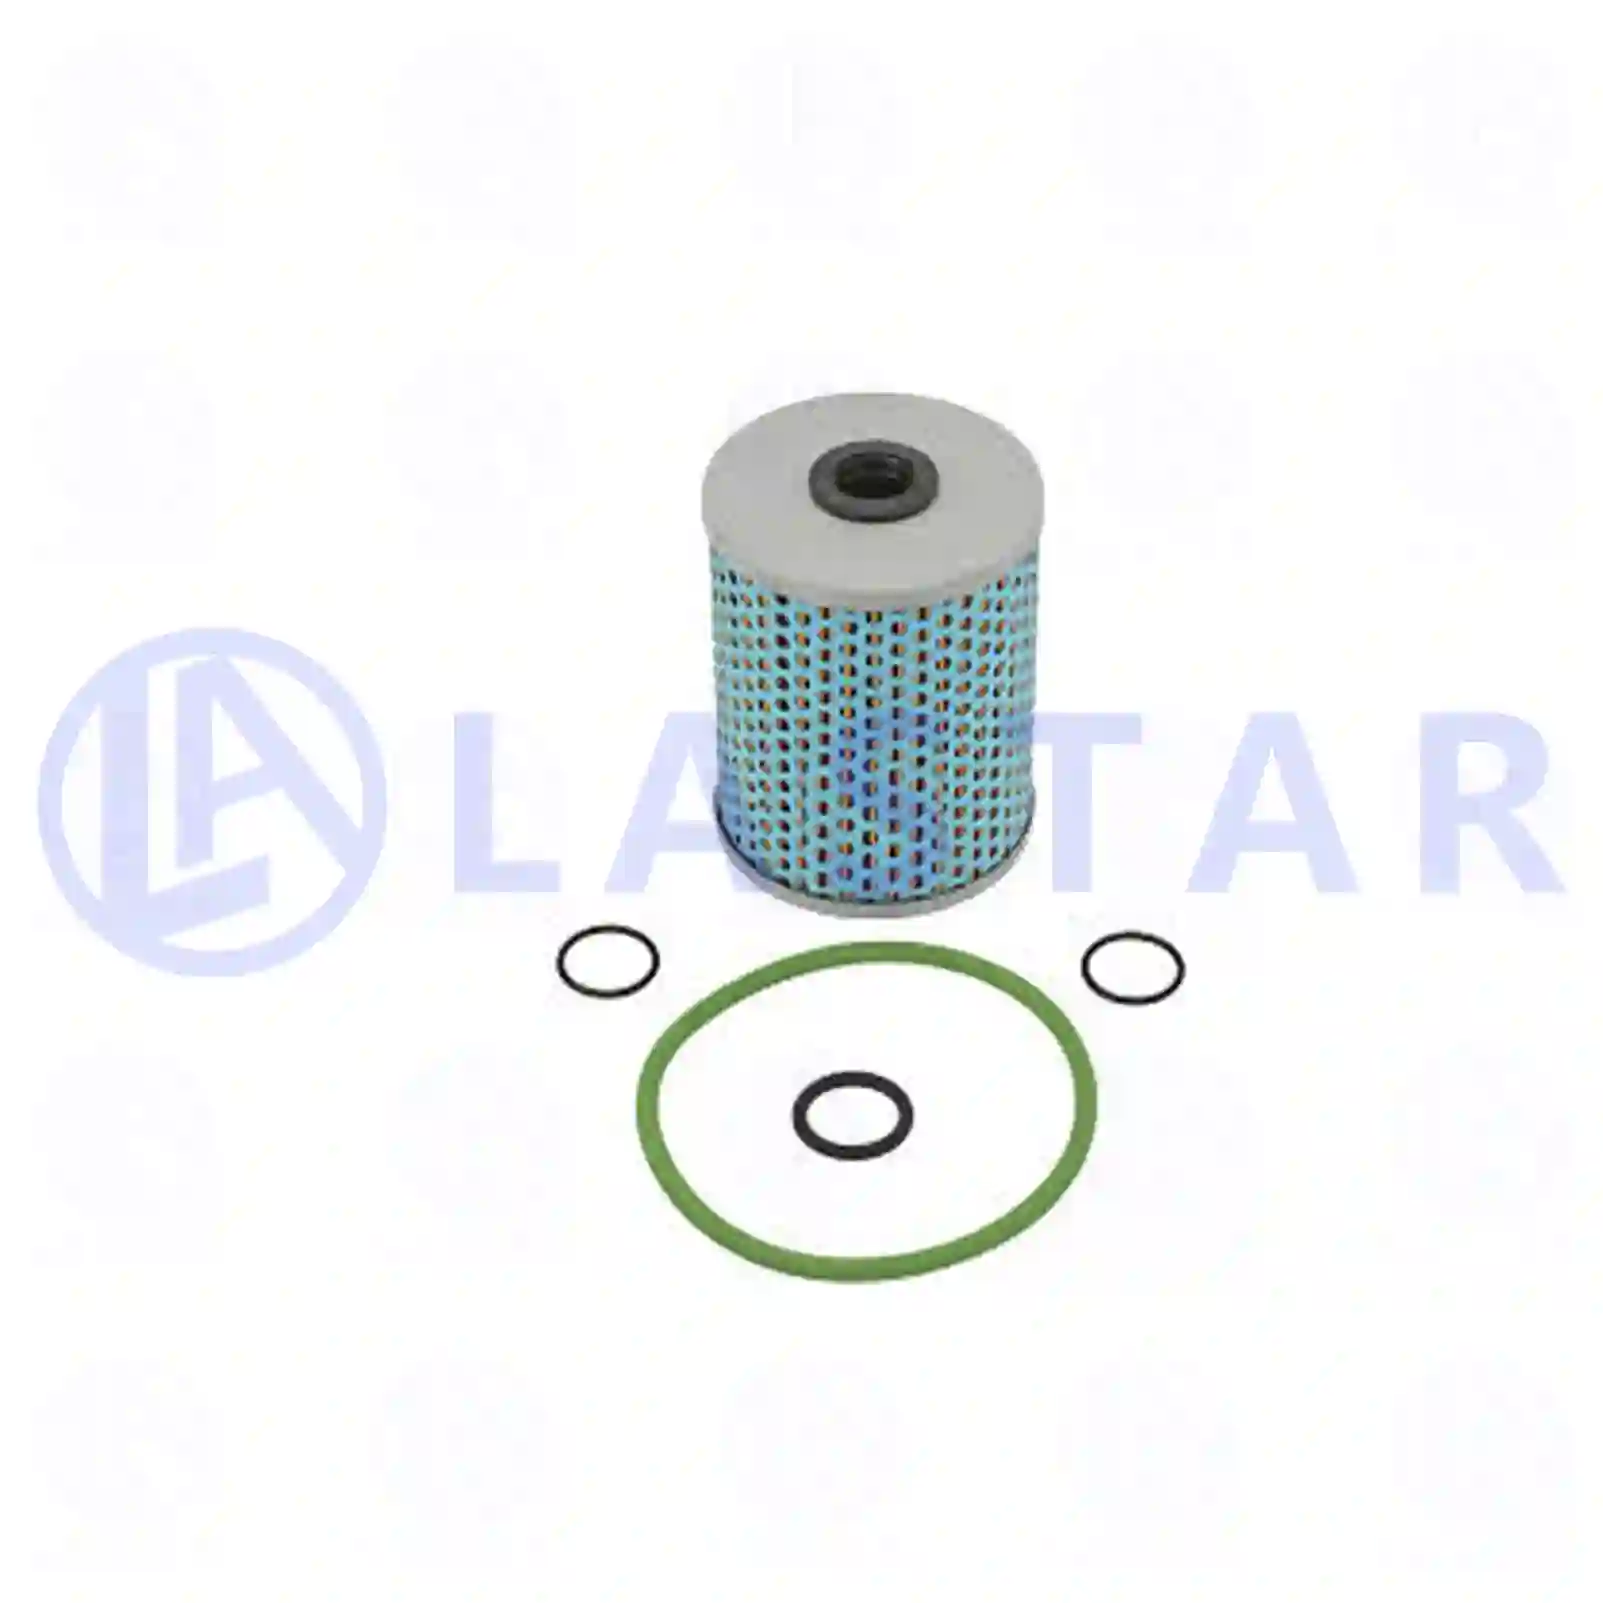  Oil filter, with seal rings || Lastar Spare Part | Truck Spare Parts, Auotomotive Spare Parts